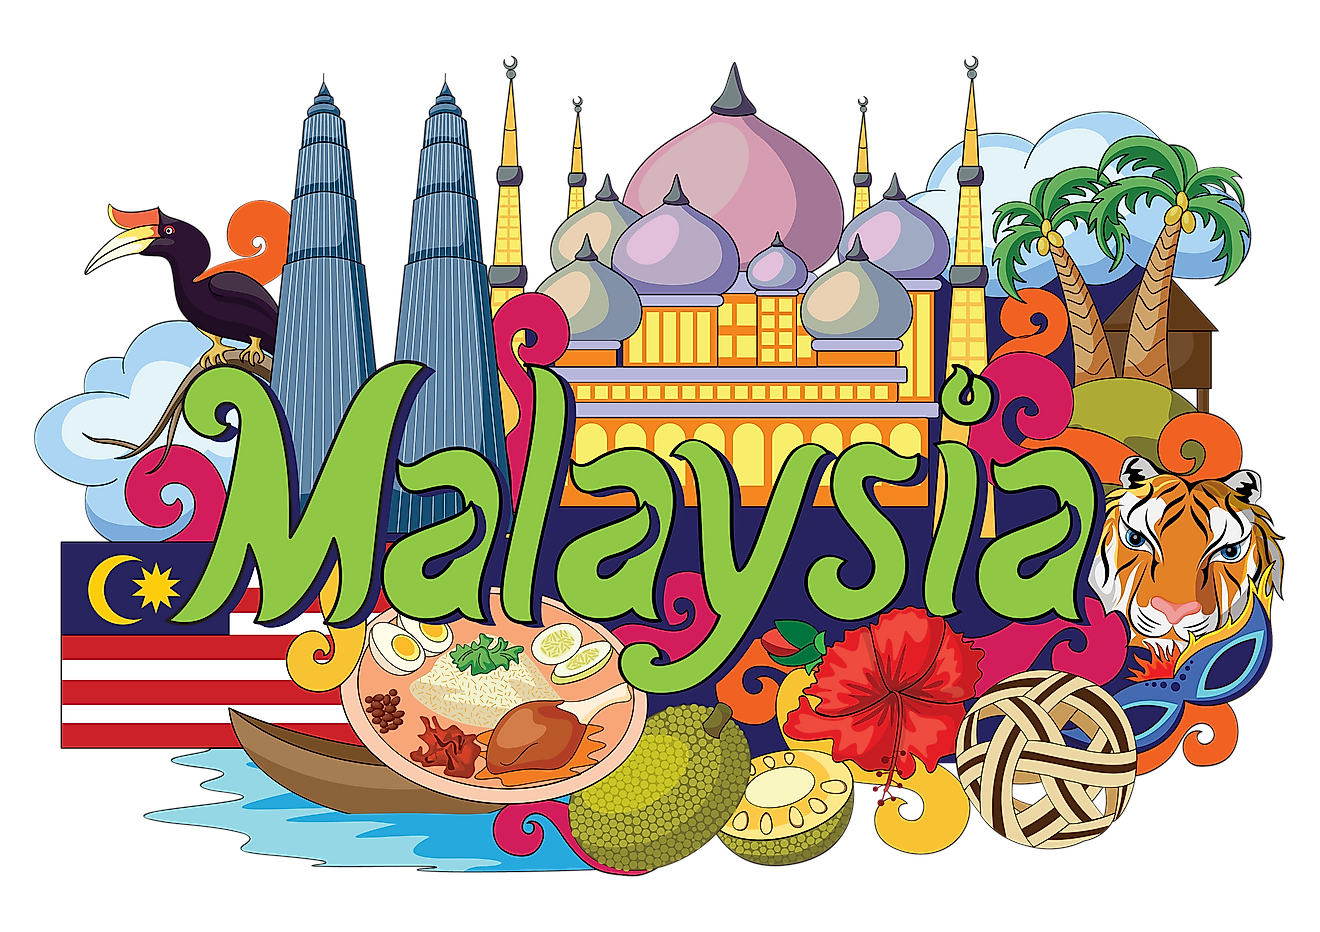 Malaysia is a Southeast Asian country with rich cultural diversity. Image credit: stockshoppe/Shutterstock.com